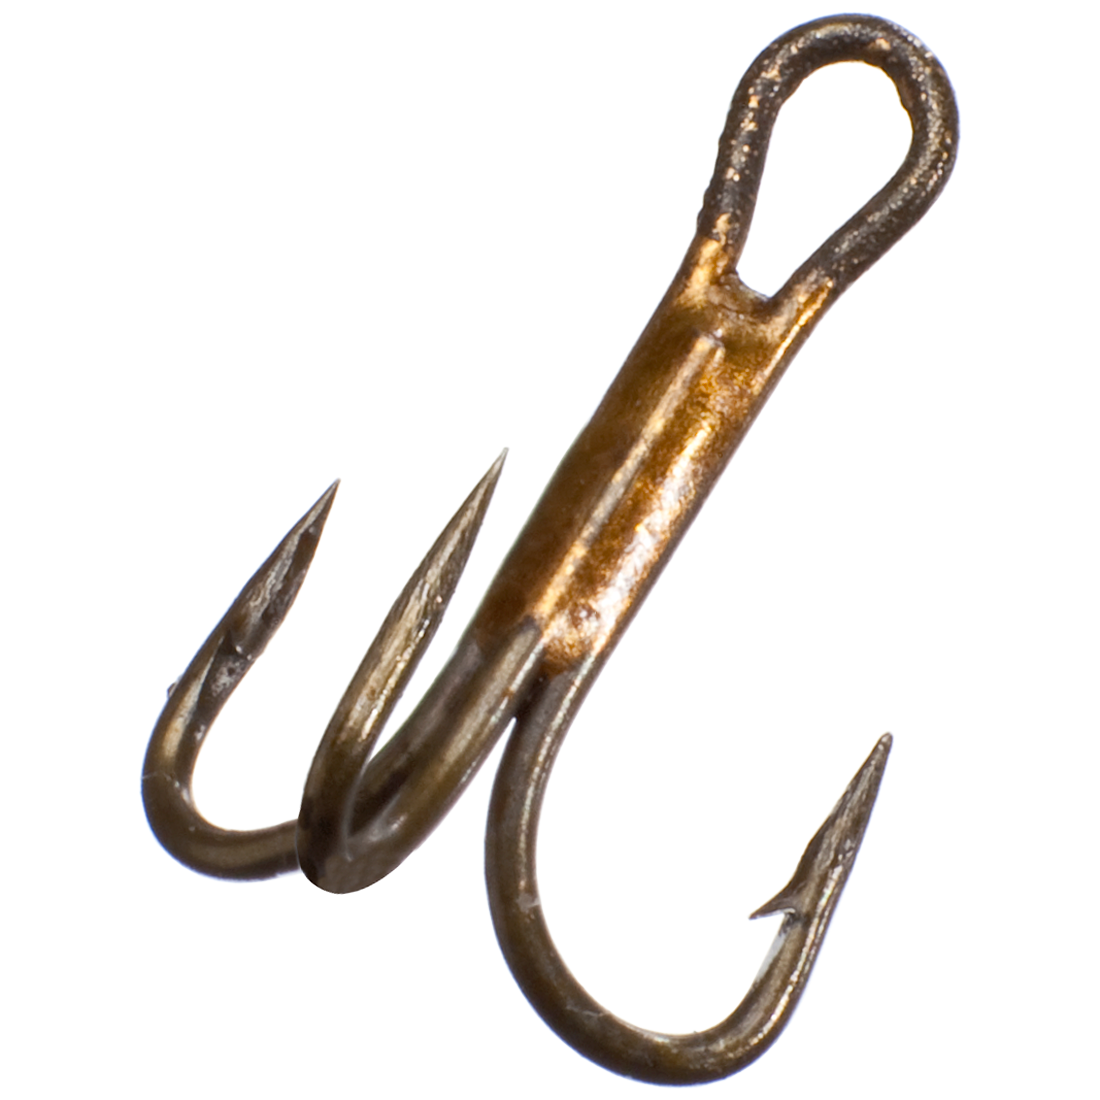 Eagle Claw 2x Double and Treble Hook,Curved Point,Regular Shank,Bronze,50-Box HO